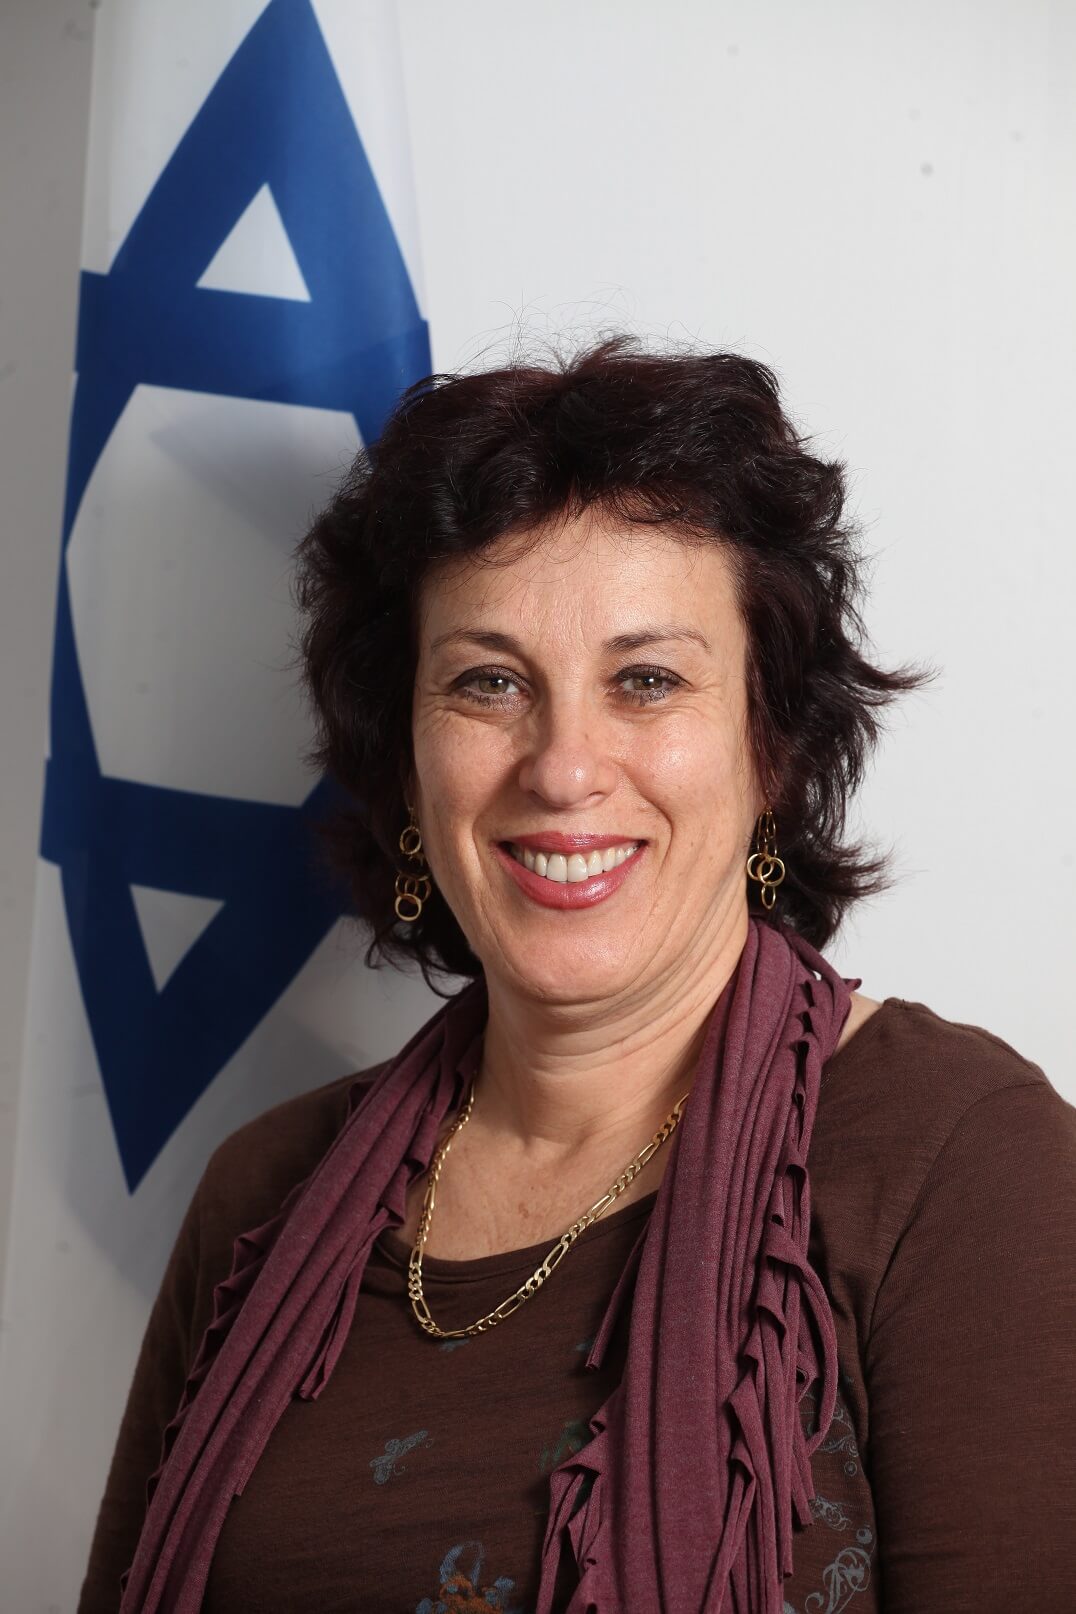 Prof. Nurit Yermia, the chief scientist at the Ministry of Science. Photography: Yoav Dudkevich